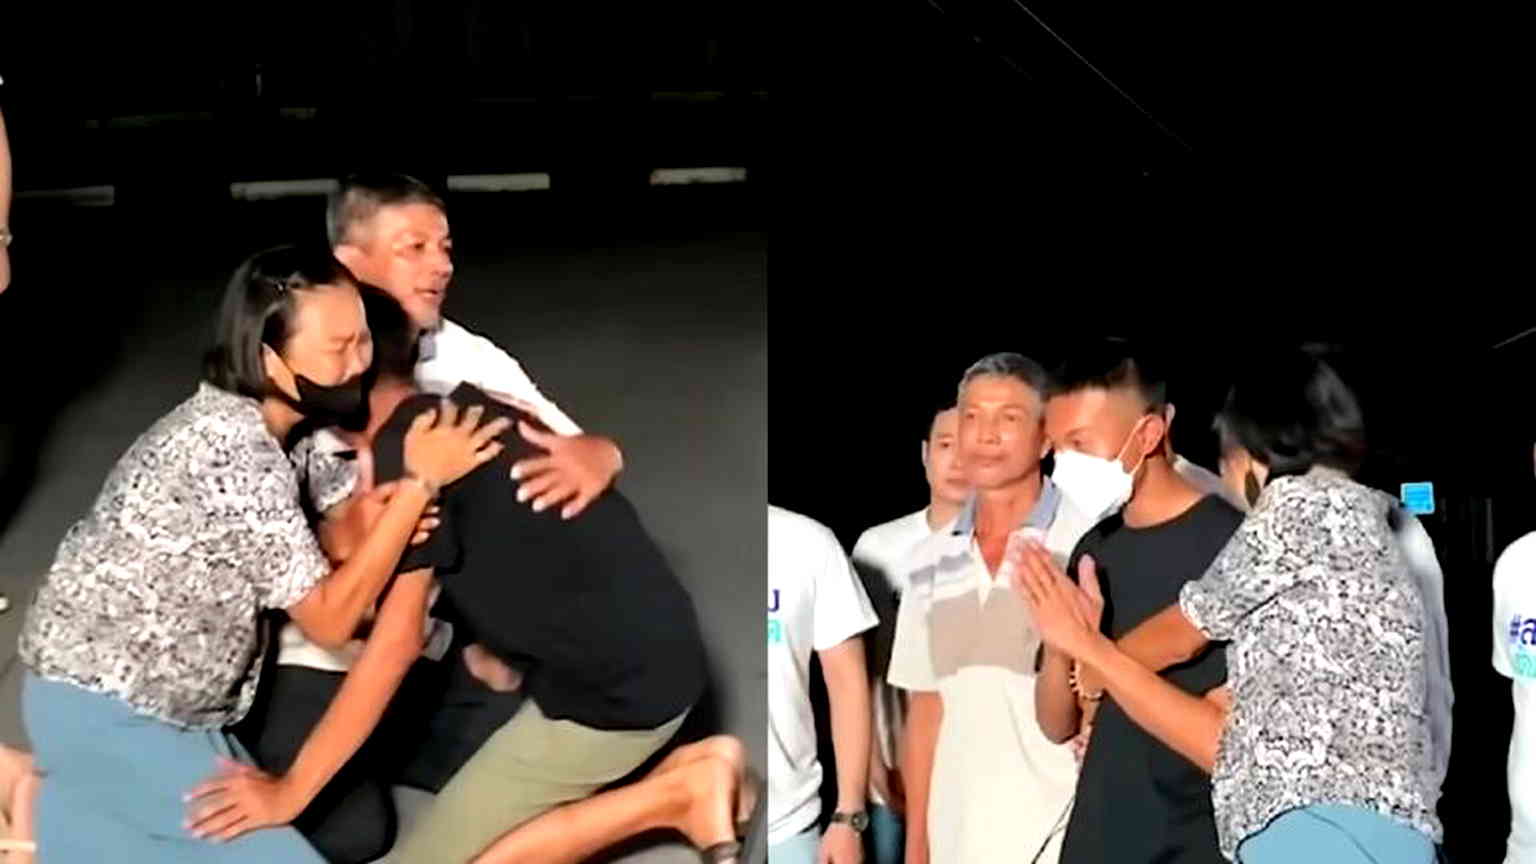 Thai man wrongfully arrested after friend used his ID to evade jail